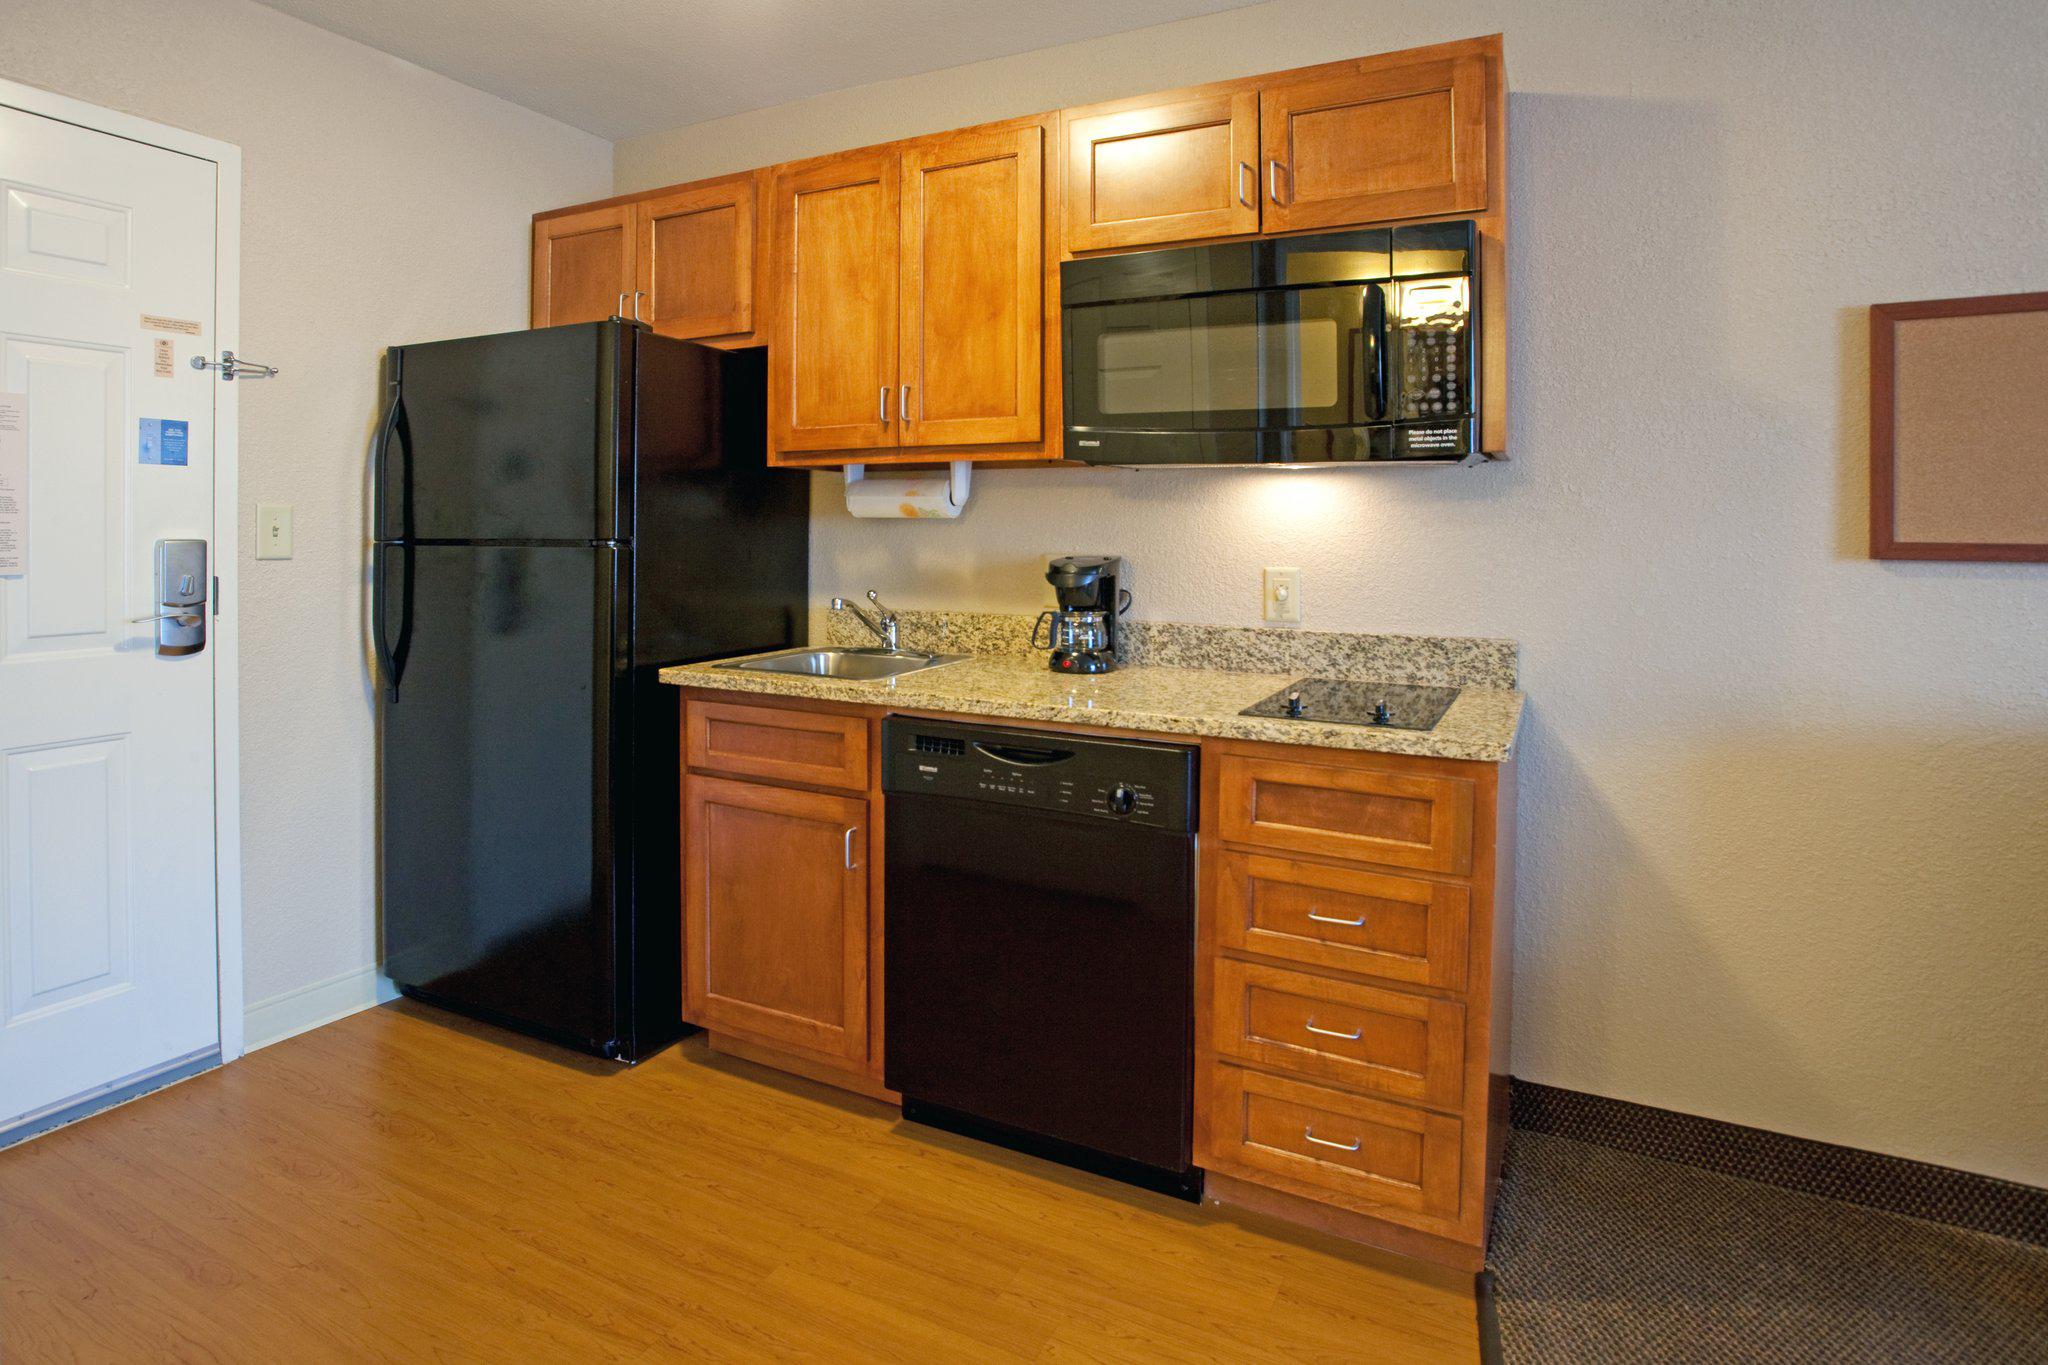 Candlewood Suites Sumter Photo